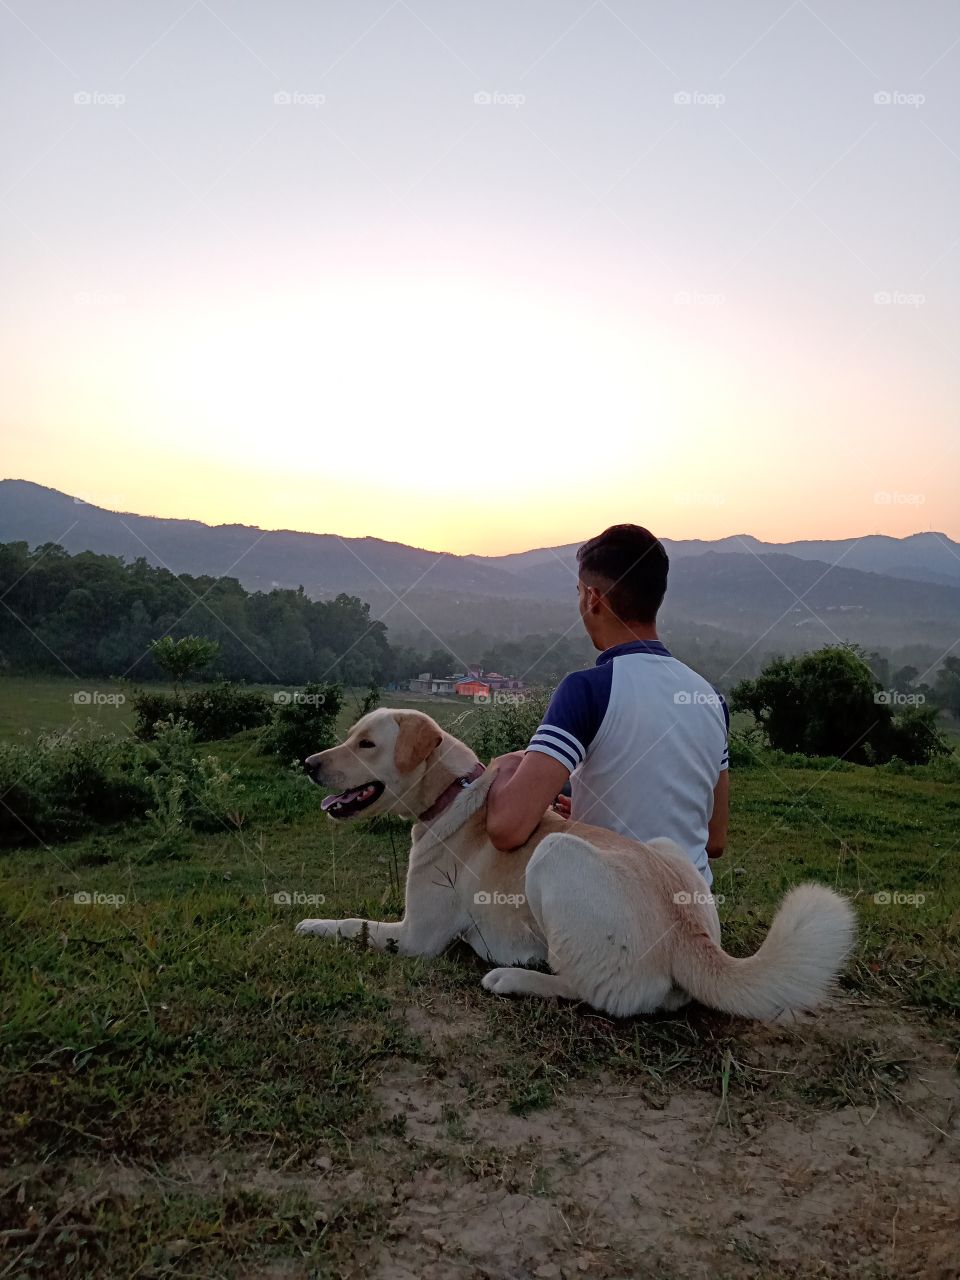 Dog and boy watching sunset together.